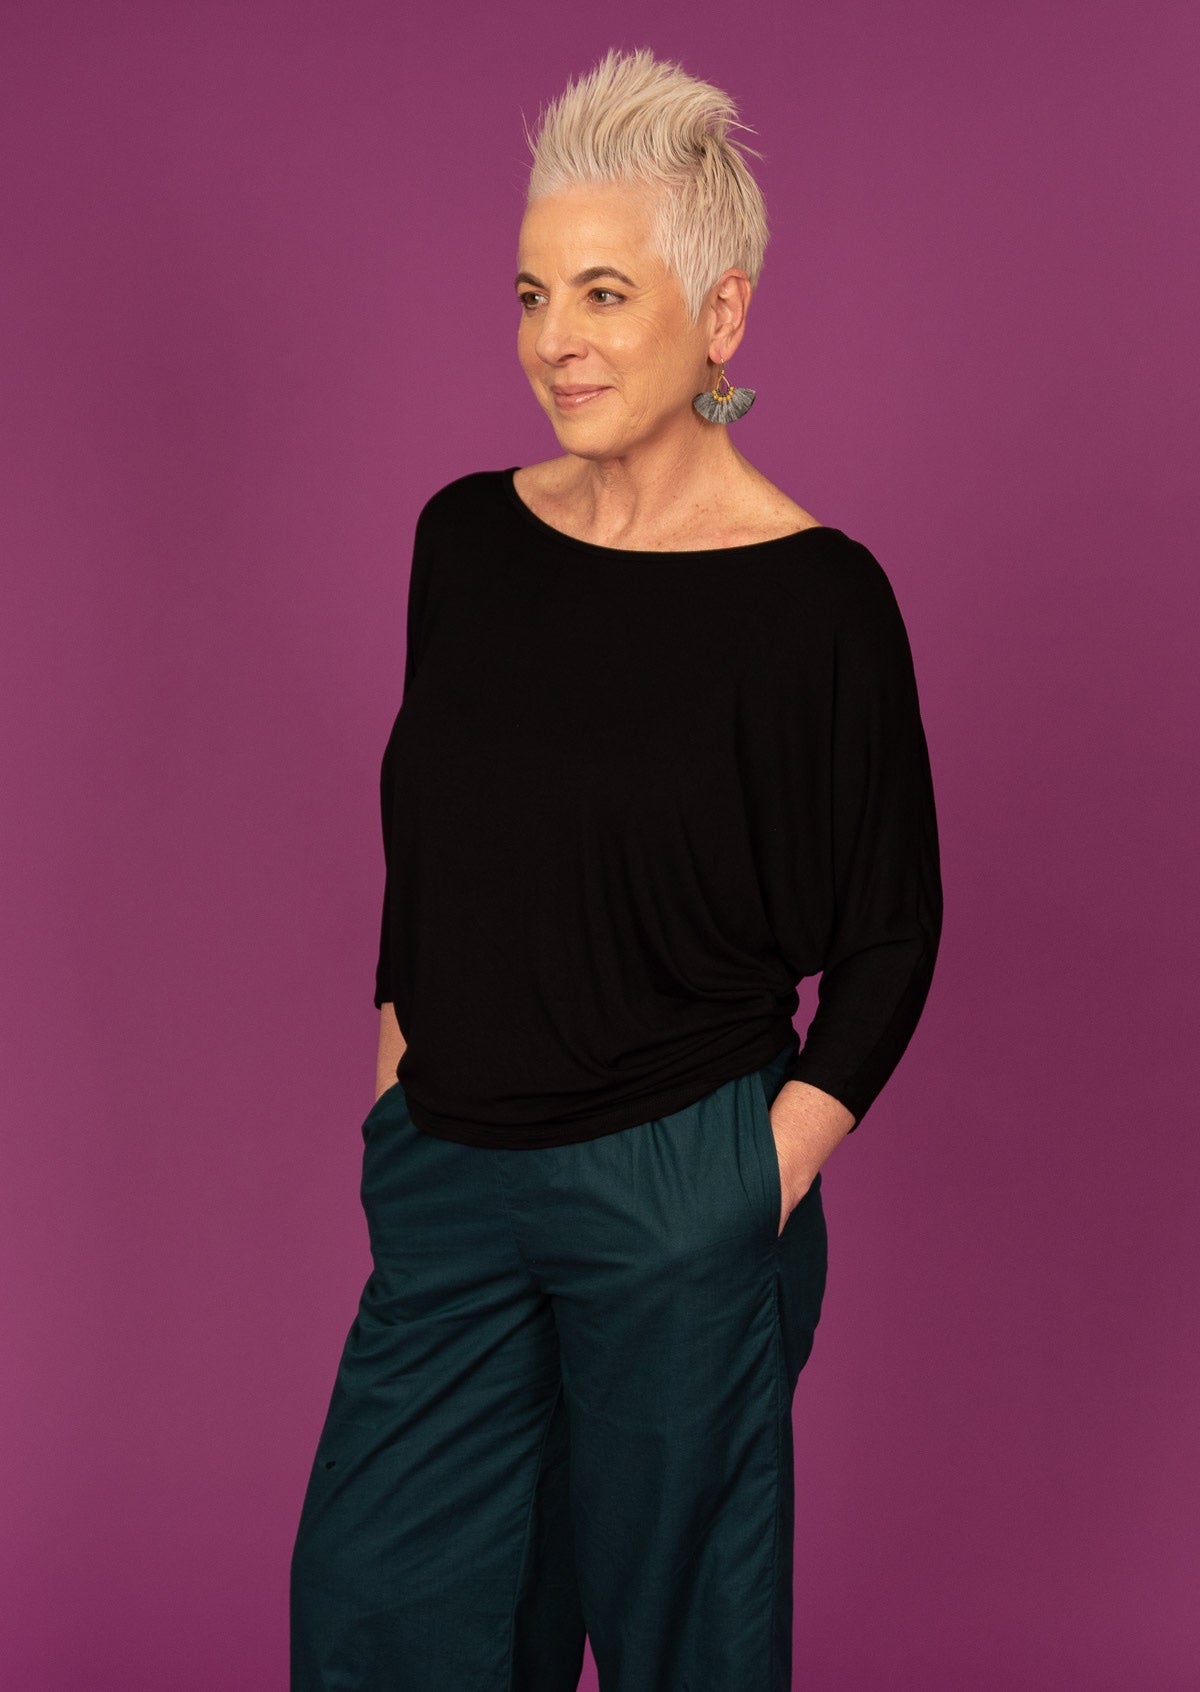 Woman wearing a 3/4 sleeve rayon batwing round neckline black top on purple background.